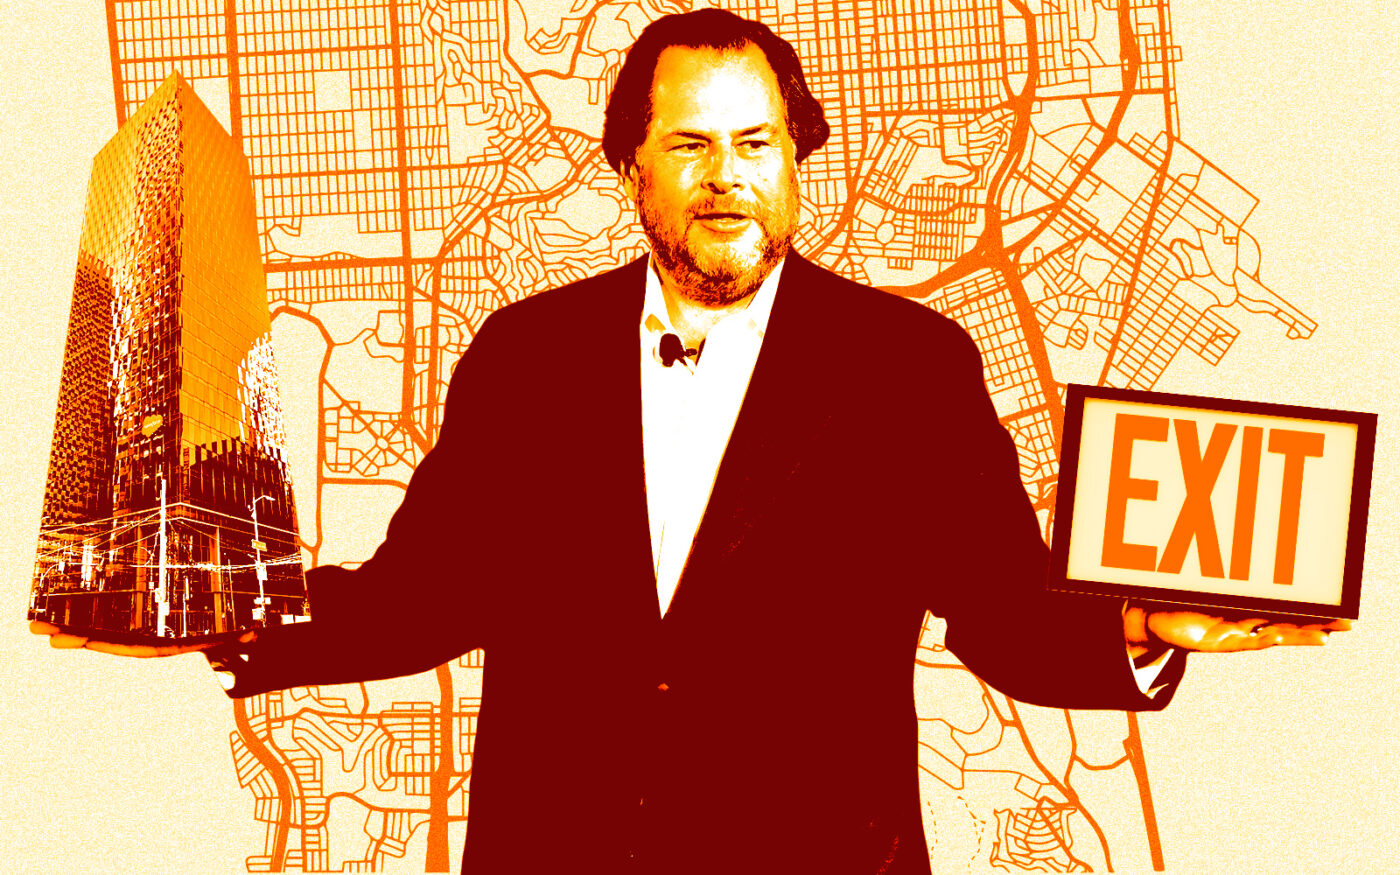 Salesforce's Marc Benioff and 350 Mission Street (Getty, Dead.rabbit, CC BY-SA 4.0 - via Wikimedia Commons)